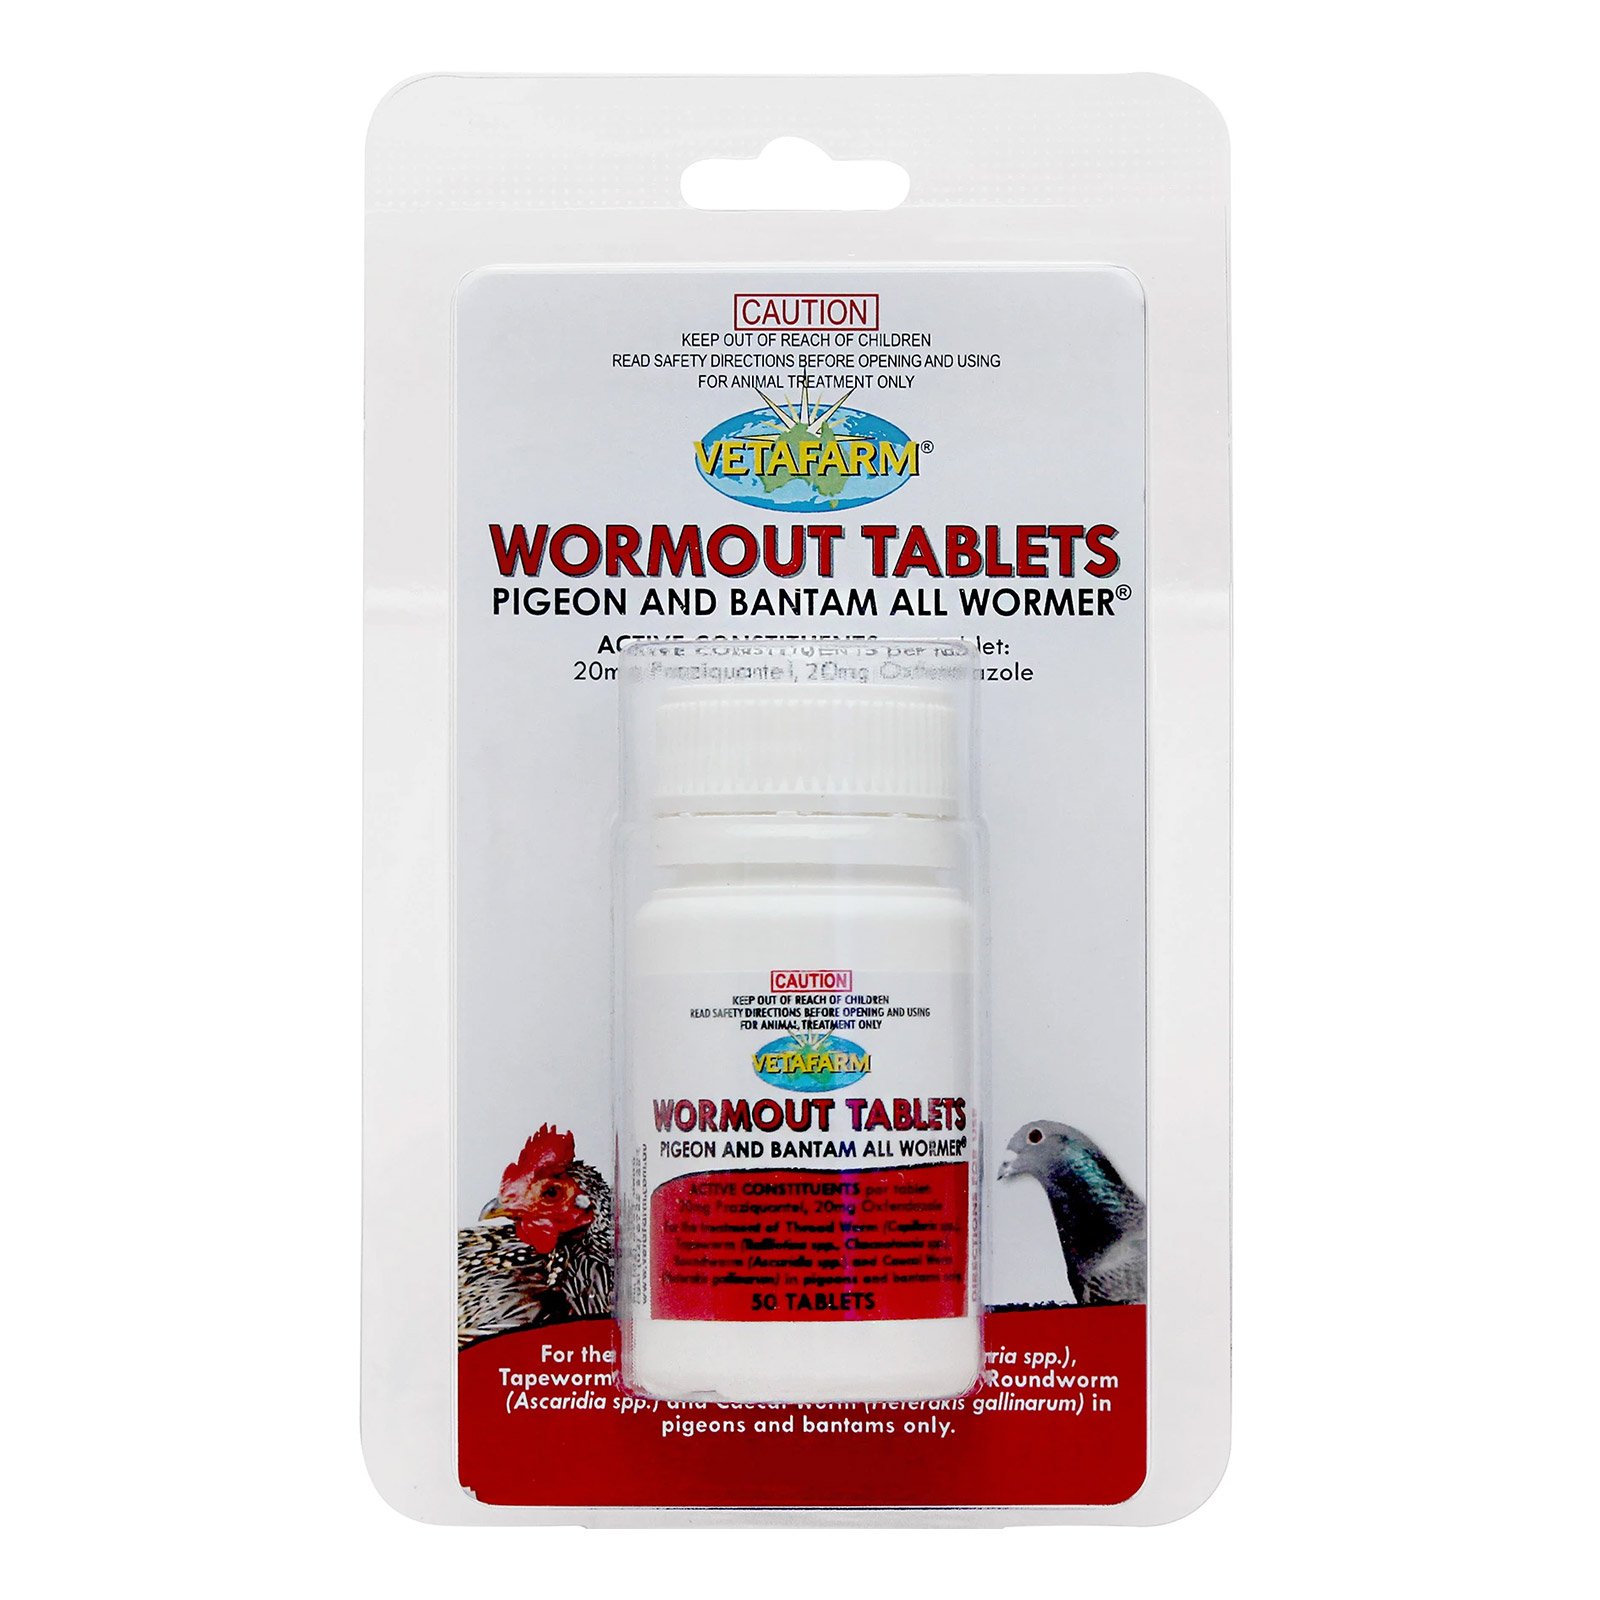 VetaFarm Wormout Tablets for Pigeons and Bantams Tablets